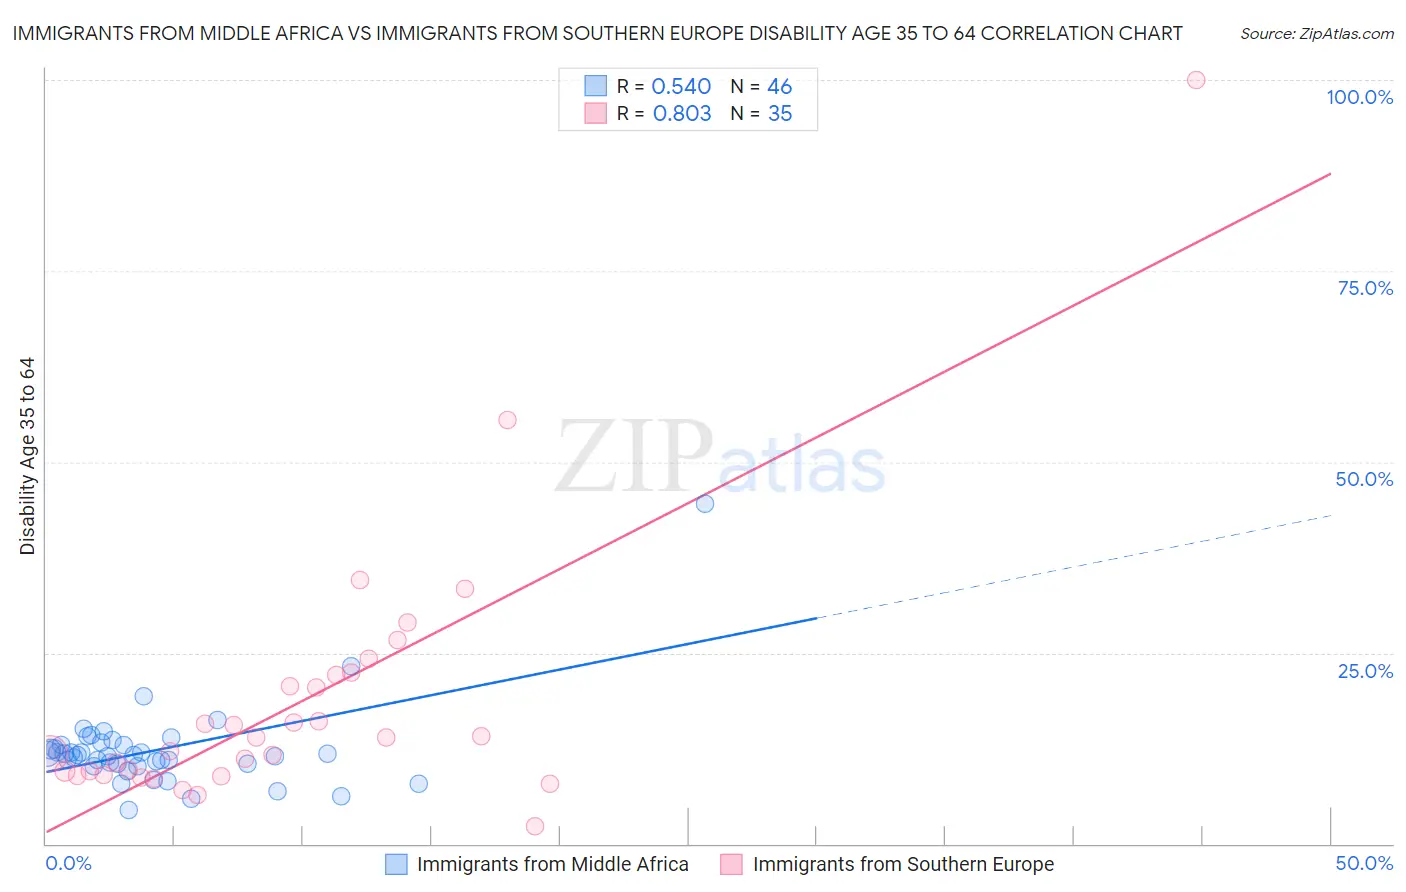 Immigrants from Middle Africa vs Immigrants from Southern Europe Disability Age 35 to 64